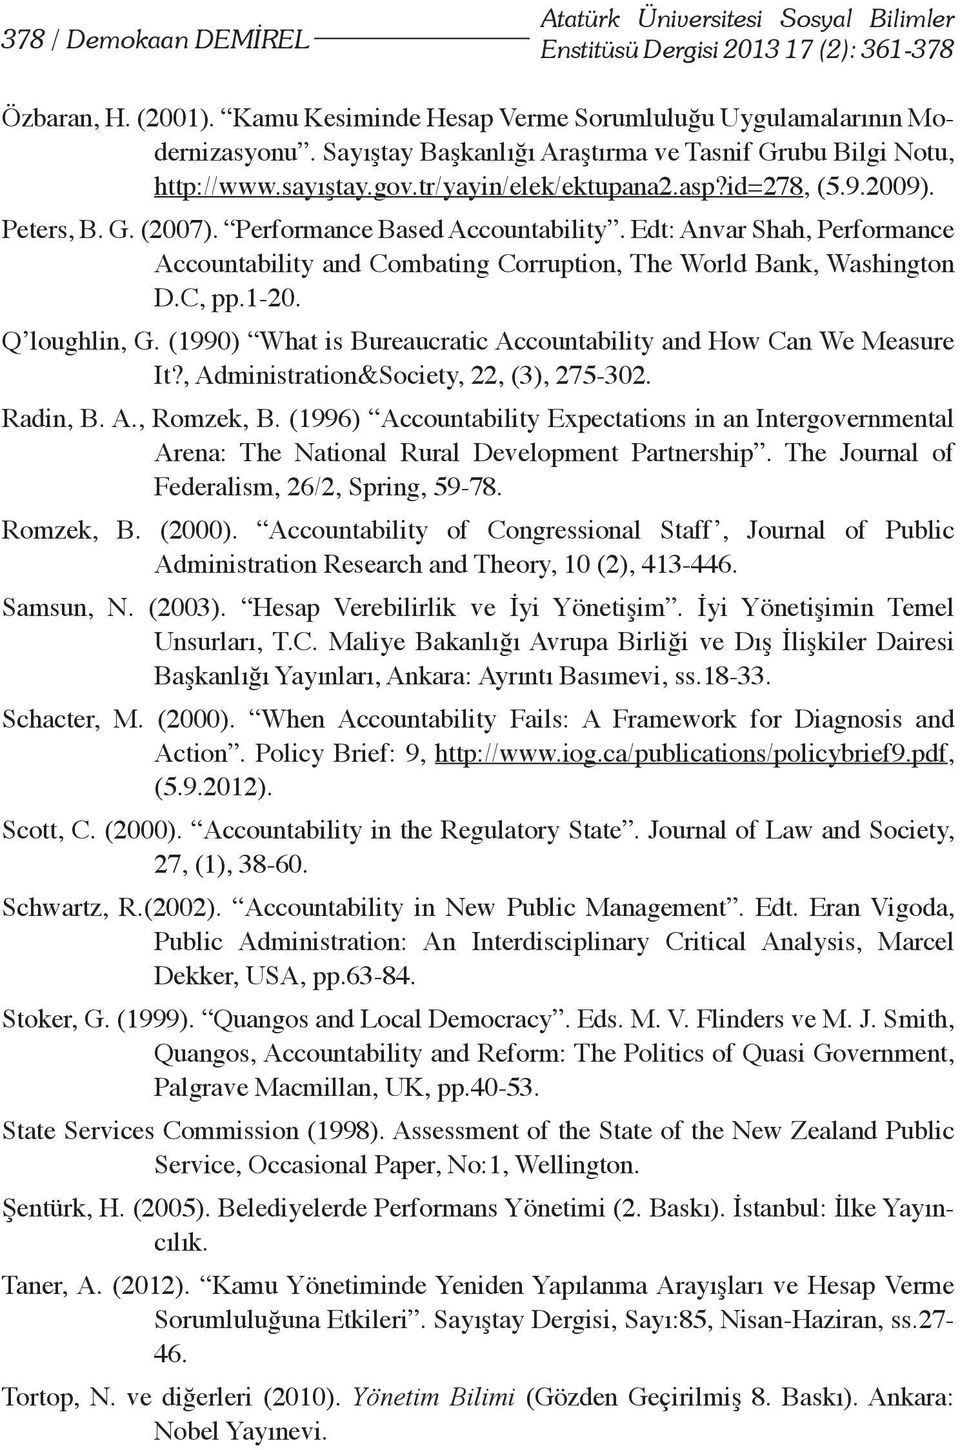 Edt: Anvar Shah, Performance Accountability and Combating Corruption, The World Bank, Washington D.C, pp.1-20. Q loughlin, G. (1990) What is Bureaucratic Accountability and How Can We Measure It?